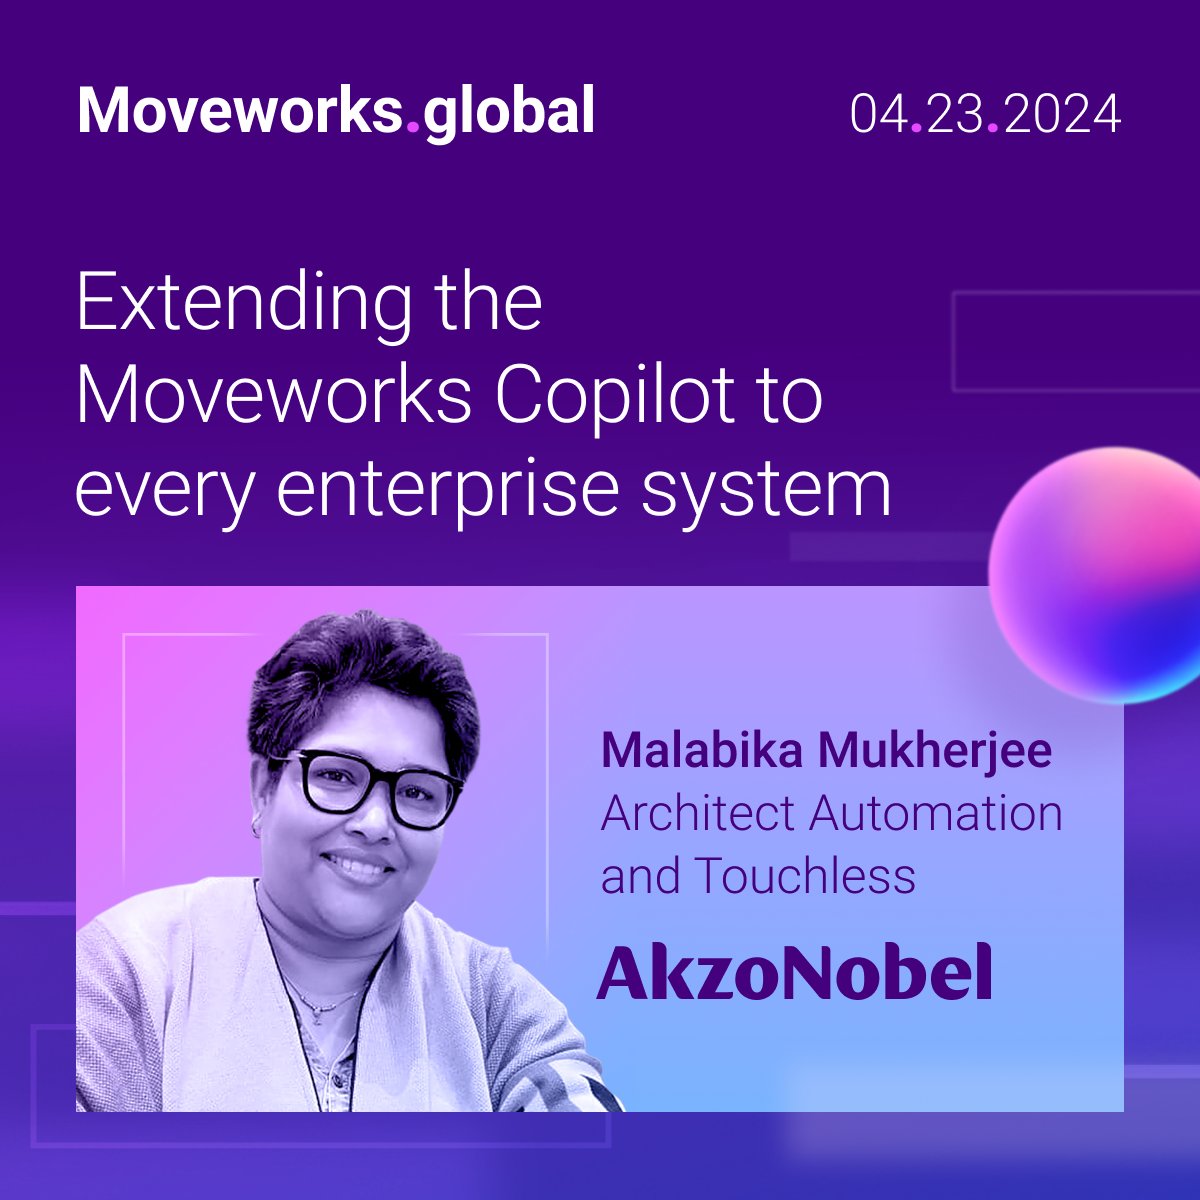 Discover limitless possibilities with enterprise LLM applications! Join us at Moveworks.global to see how Malabika Mukherjee of @AkzoNobel is revolutionizing enterprise system interactions using the Moveworks Copilot. Register now! global.moveworks.com